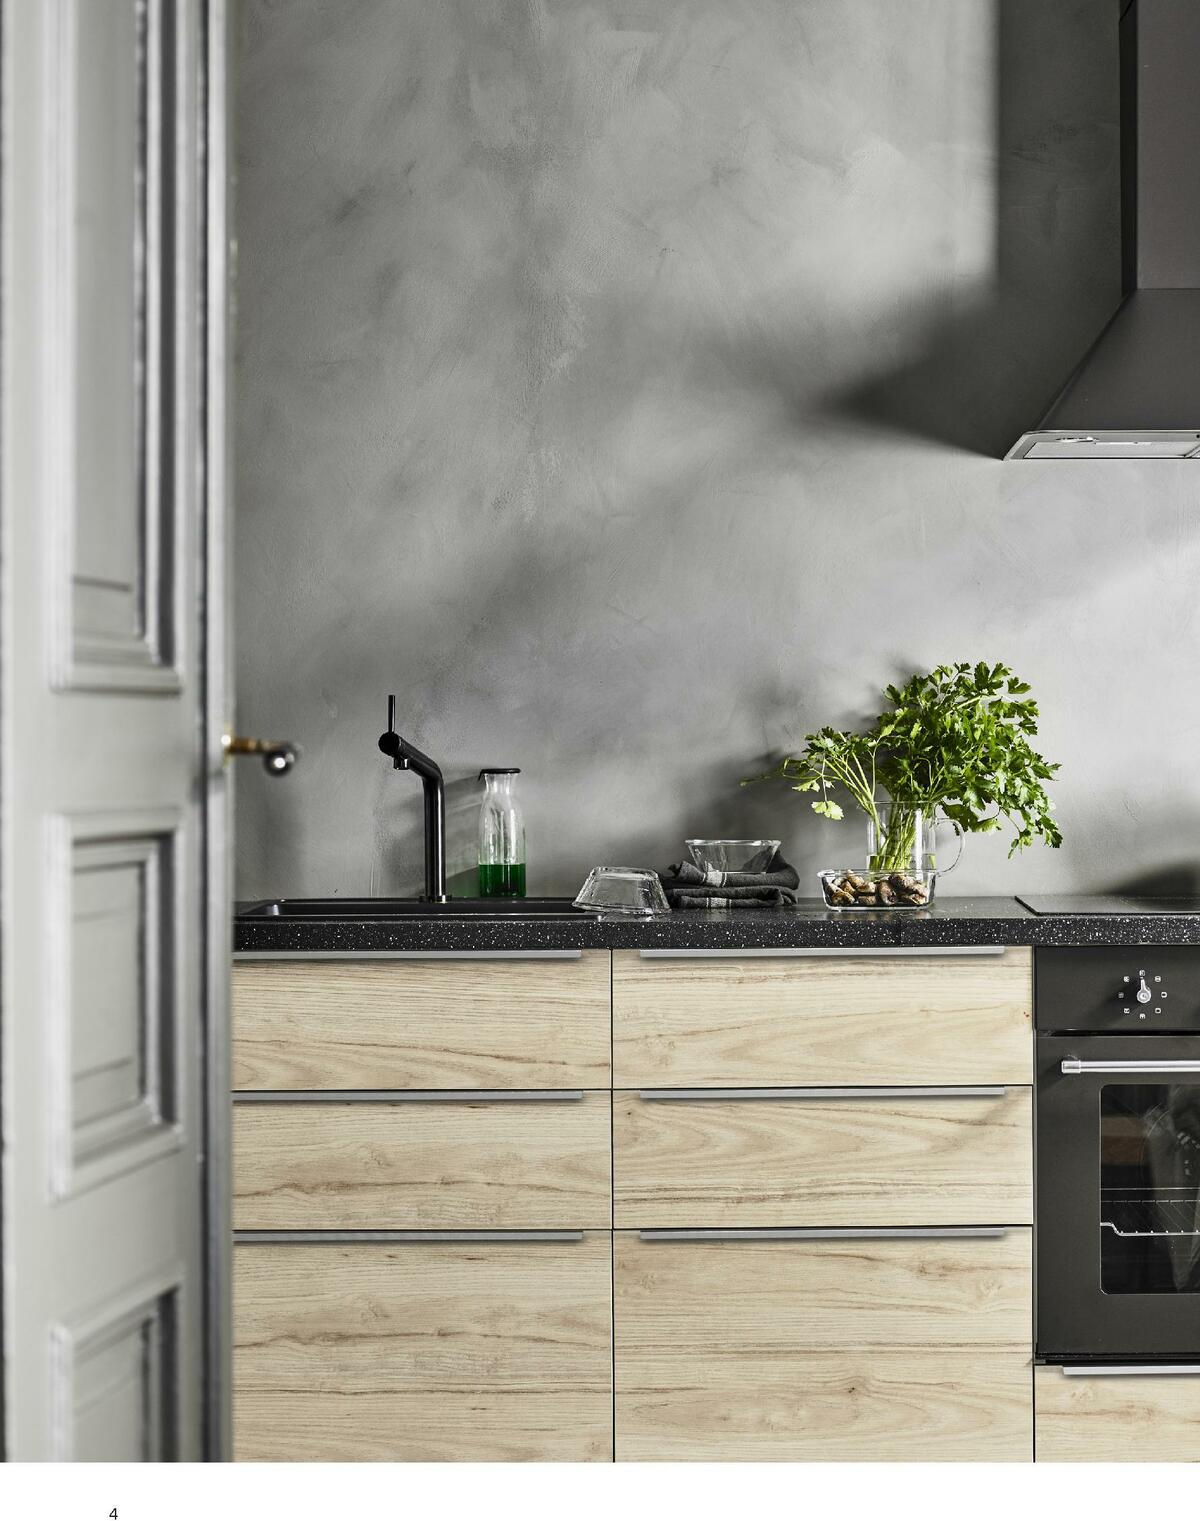 IKEA Appliances Buying Guide Catalogues from 31 October